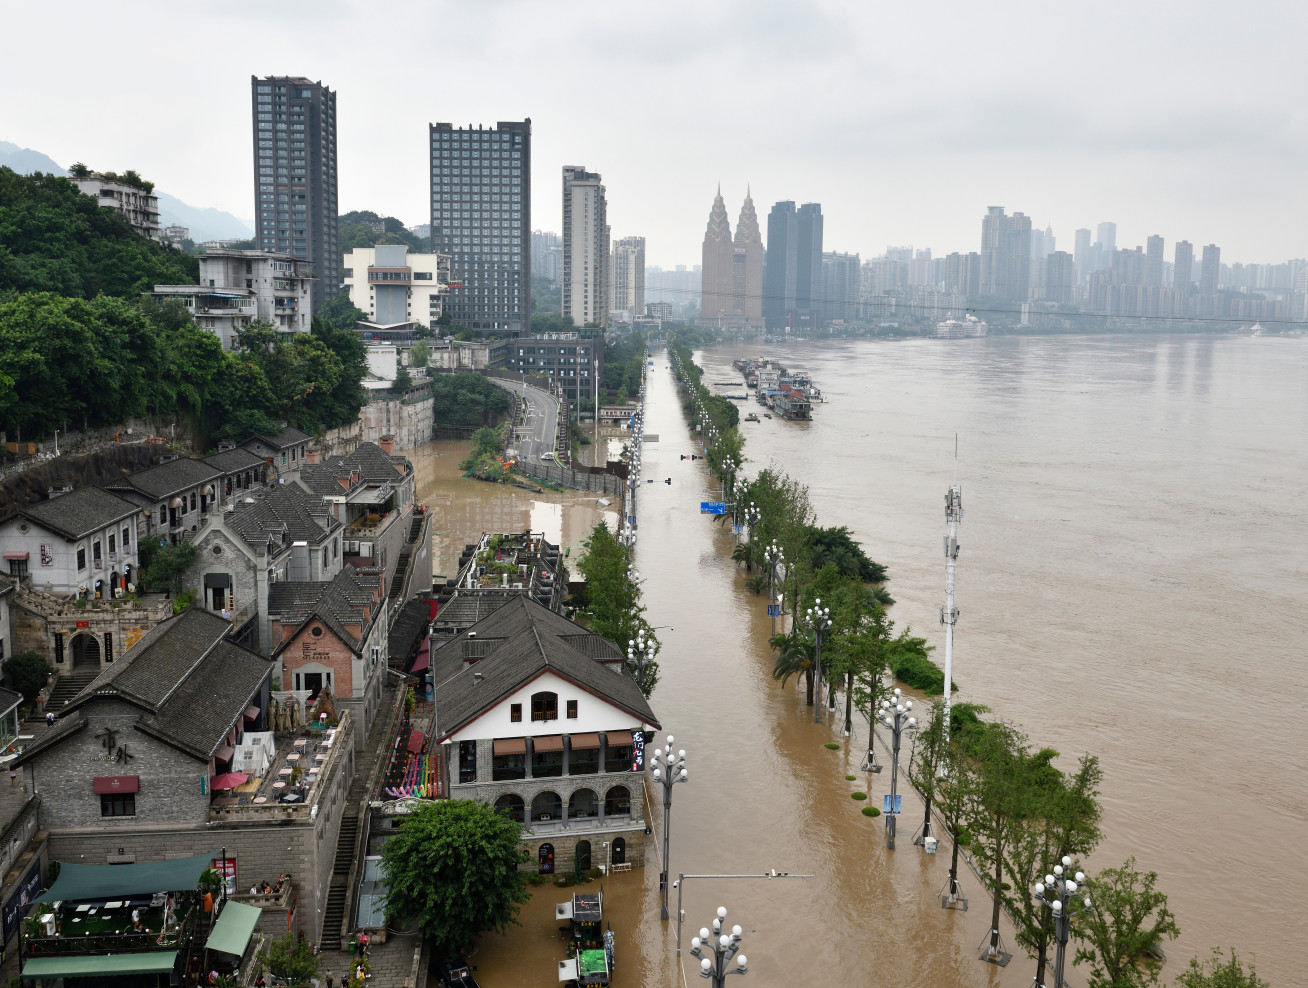 Floods in Chongqing, China, in the summer of 2020.